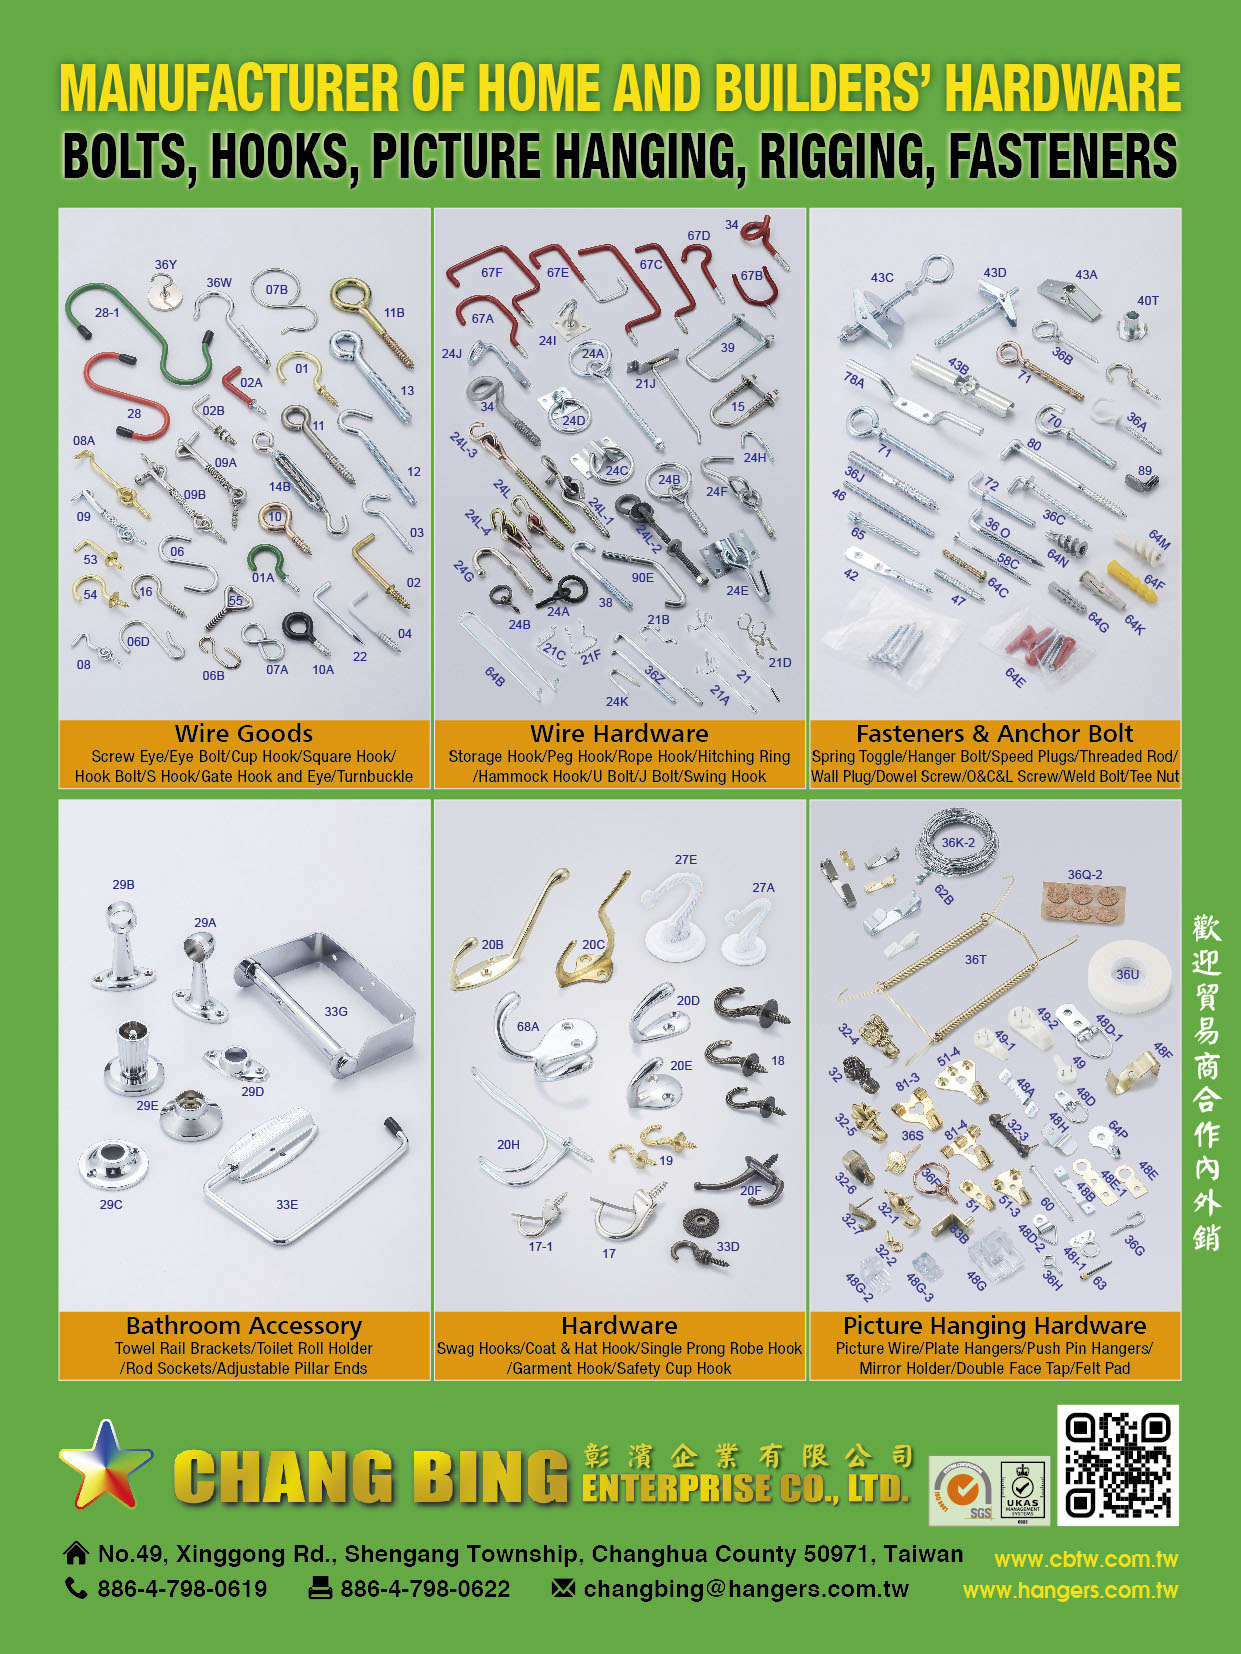 CHANG BING ENTERPRISE CO., LTD. , Home & Builers' Hardware, Bolts, Hooks, Picture Hanging, Rigging, Fasteners